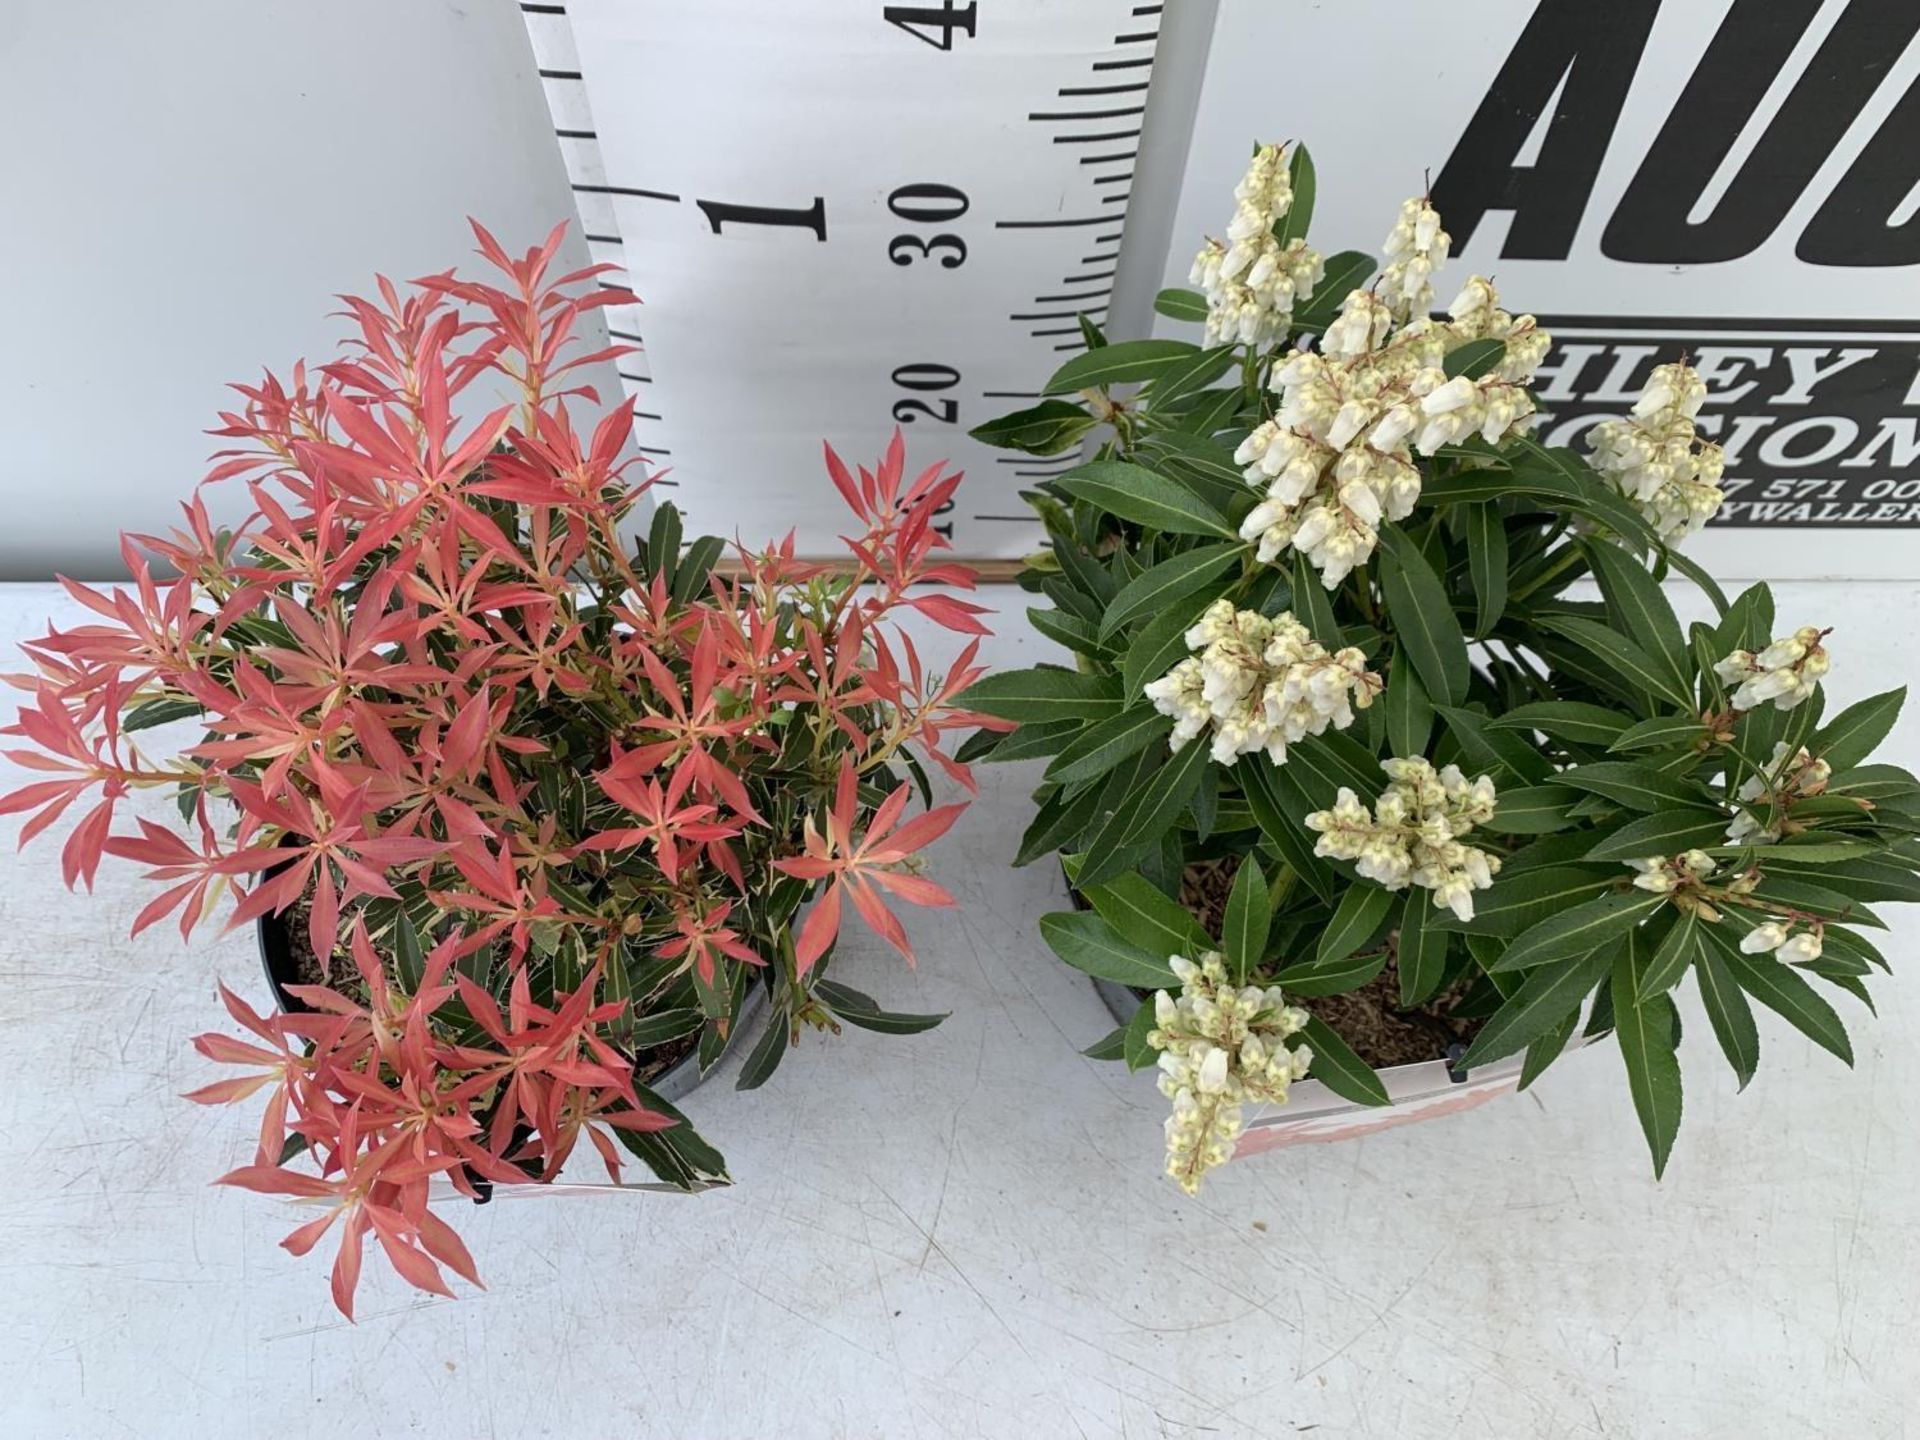 TWO PIERIS JAPONICA FORSET FLAME AND FLAMING SILVER IN 3 LTR POTS 40CM TALL PLUS VAT TO BE SOLD - Image 4 of 12